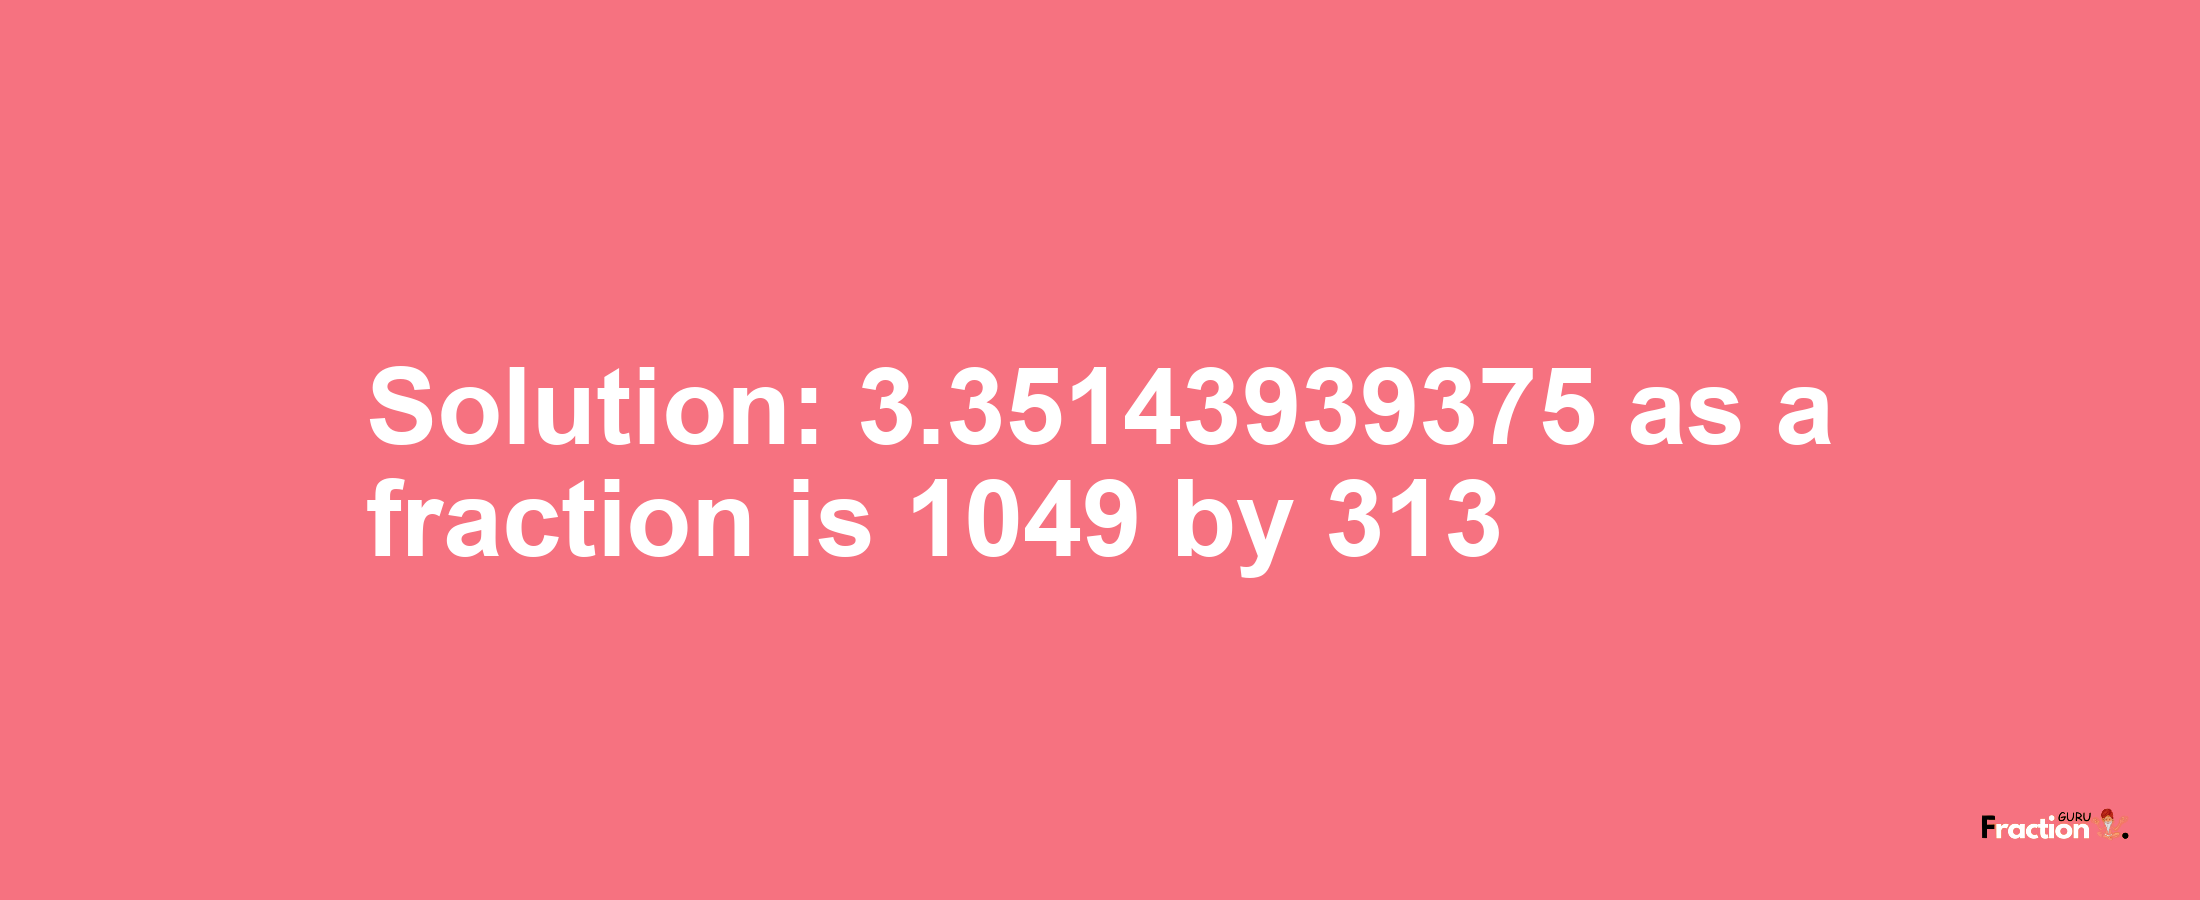 Solution:3.35143939375 as a fraction is 1049/313